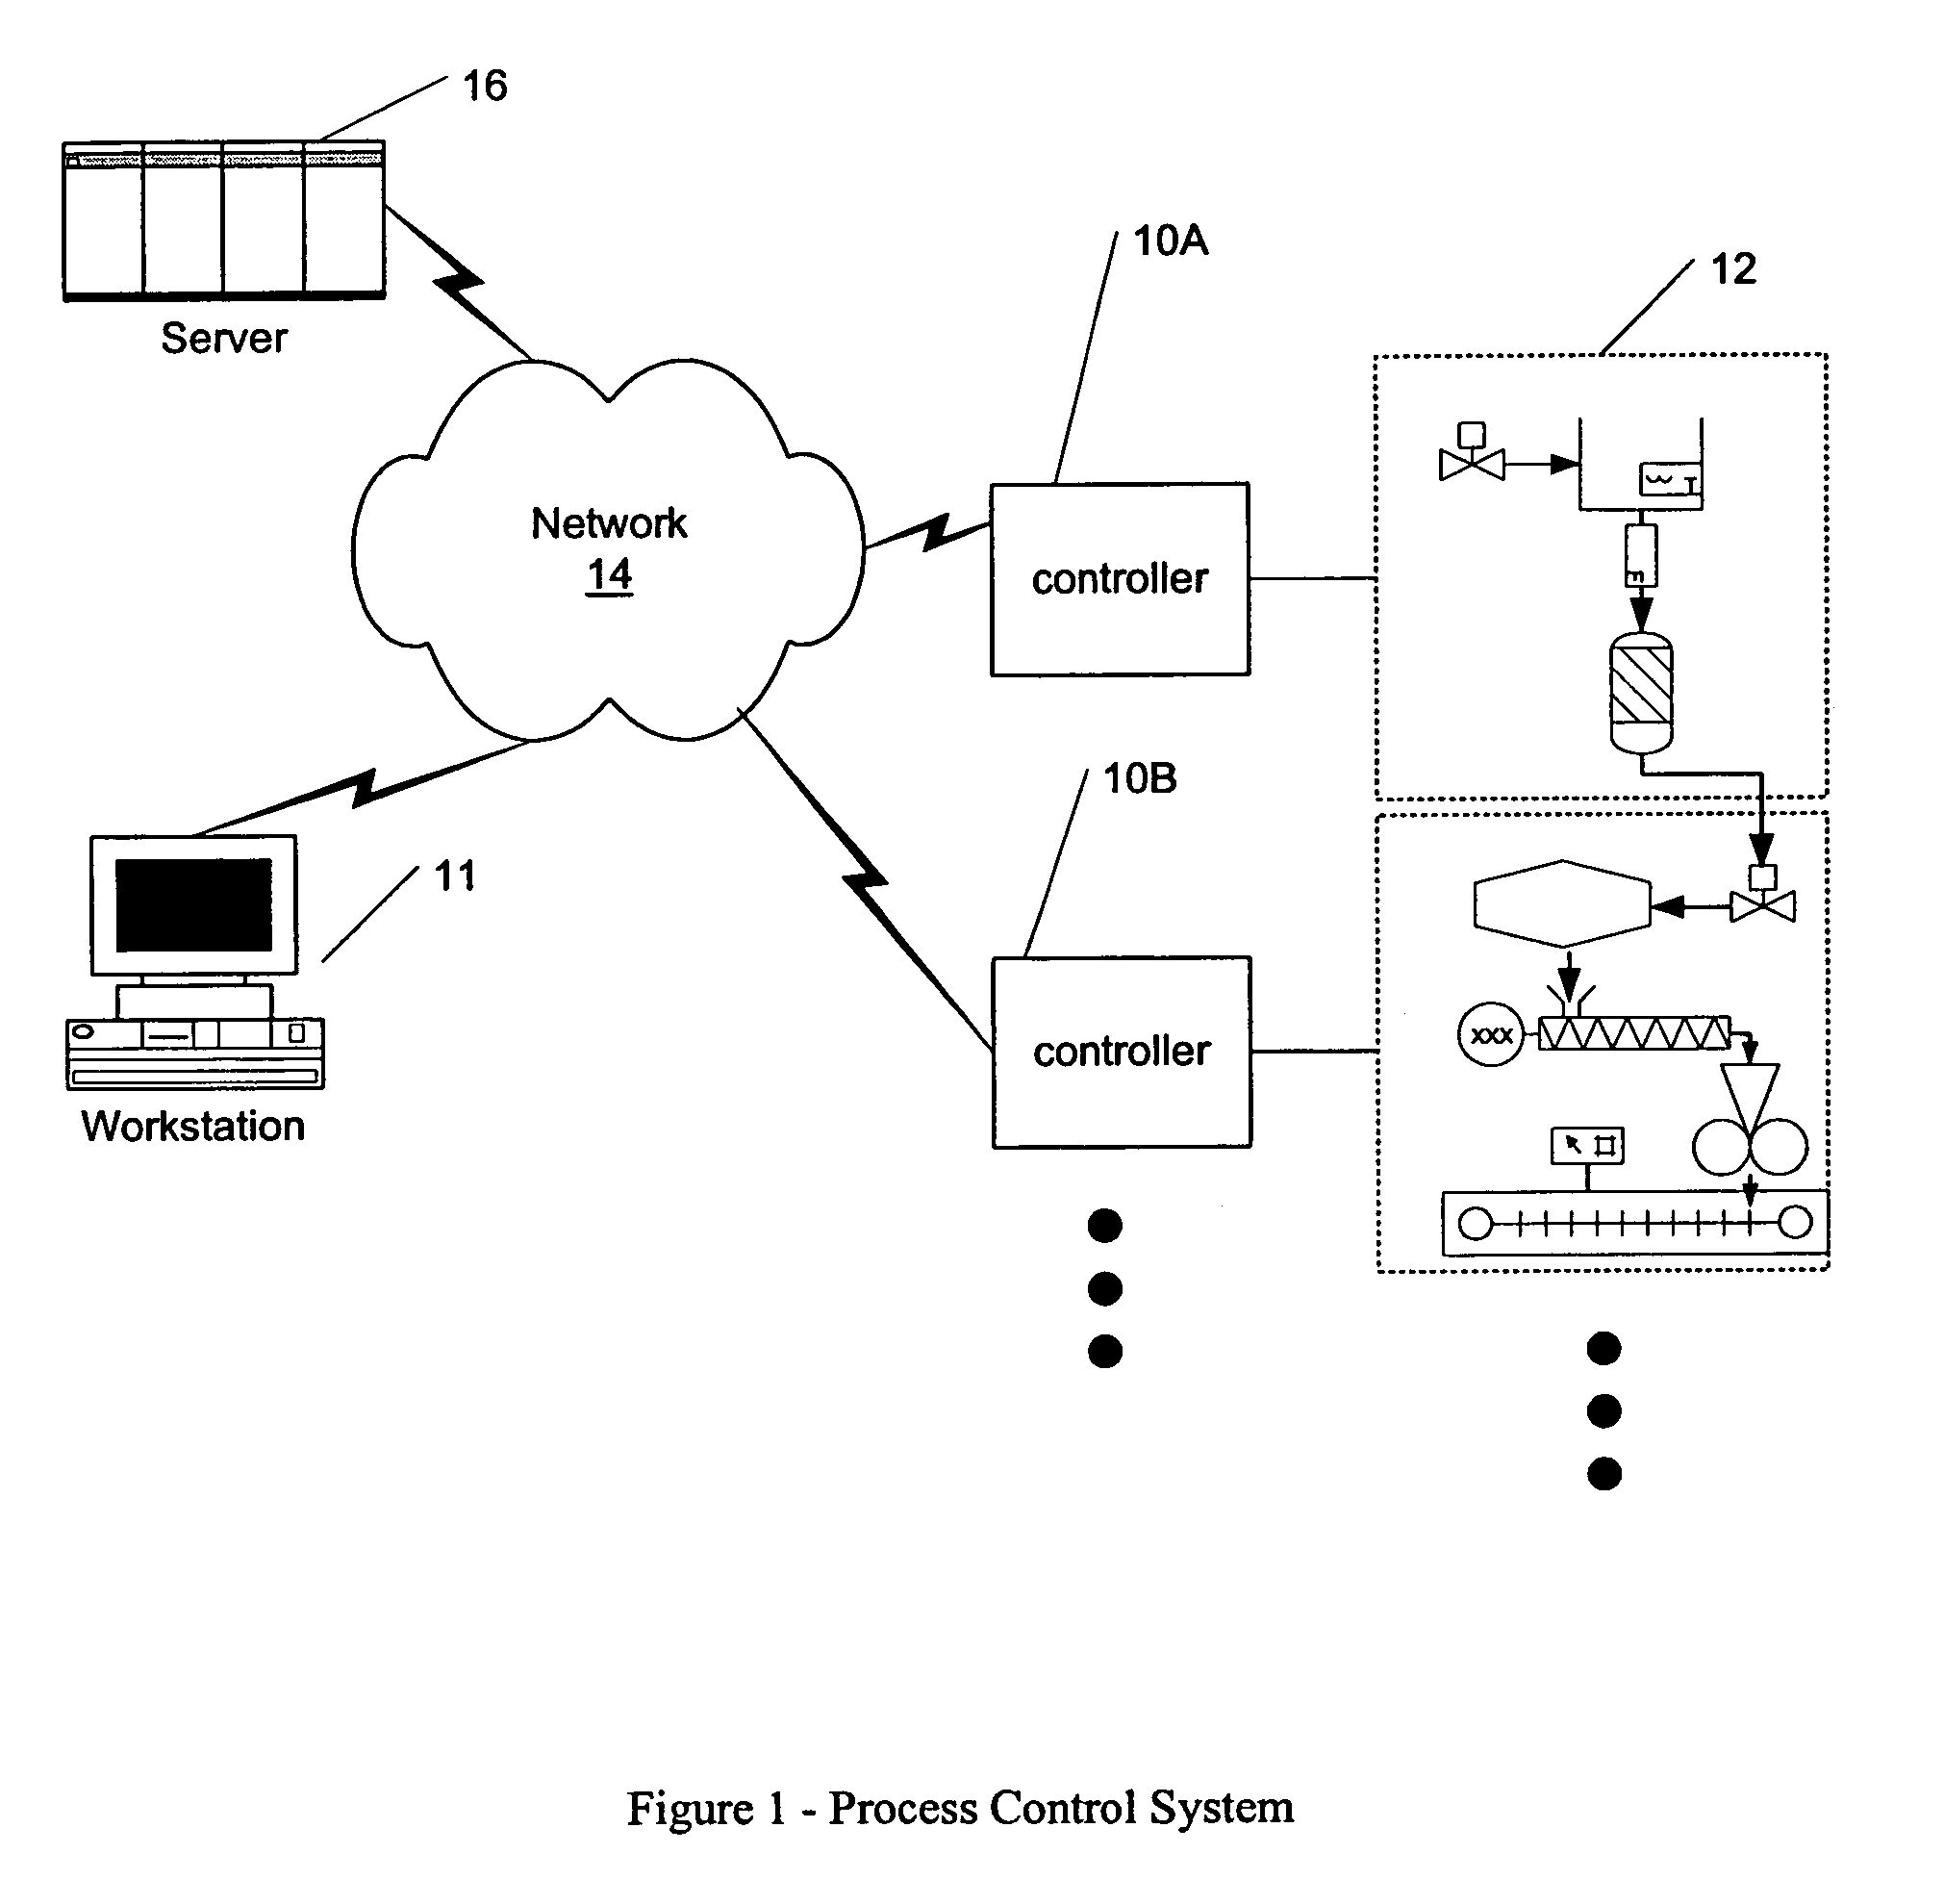 Methods and apparatus for control configuration with versioning, security, composite blocks, edit selection, object swapping, formulaic values and other aspects